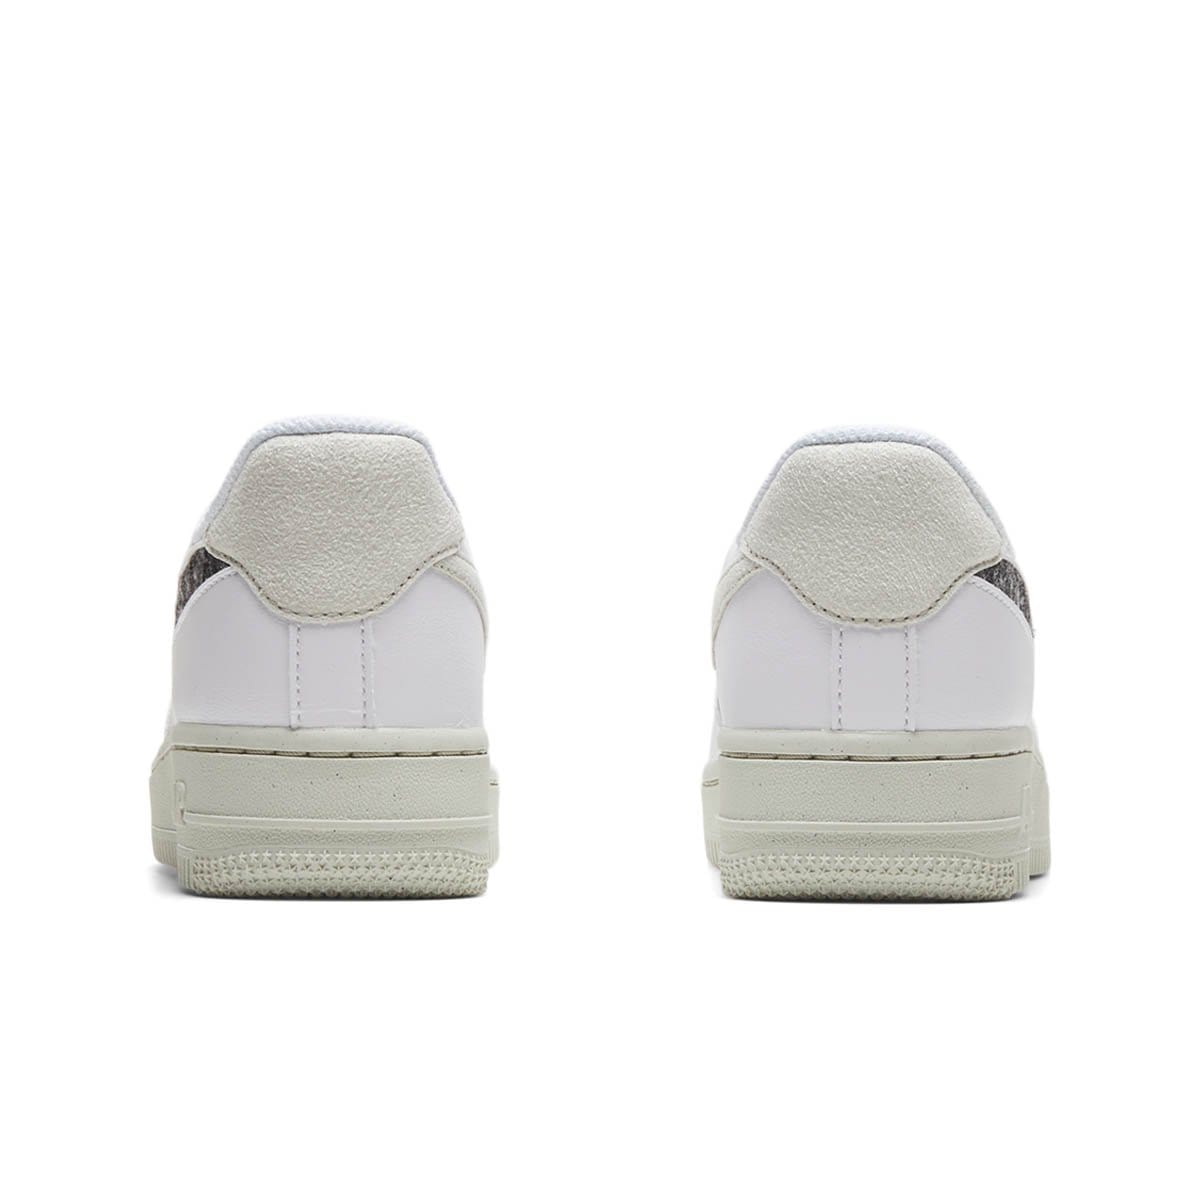 light grey force 1 leather 2 trainers